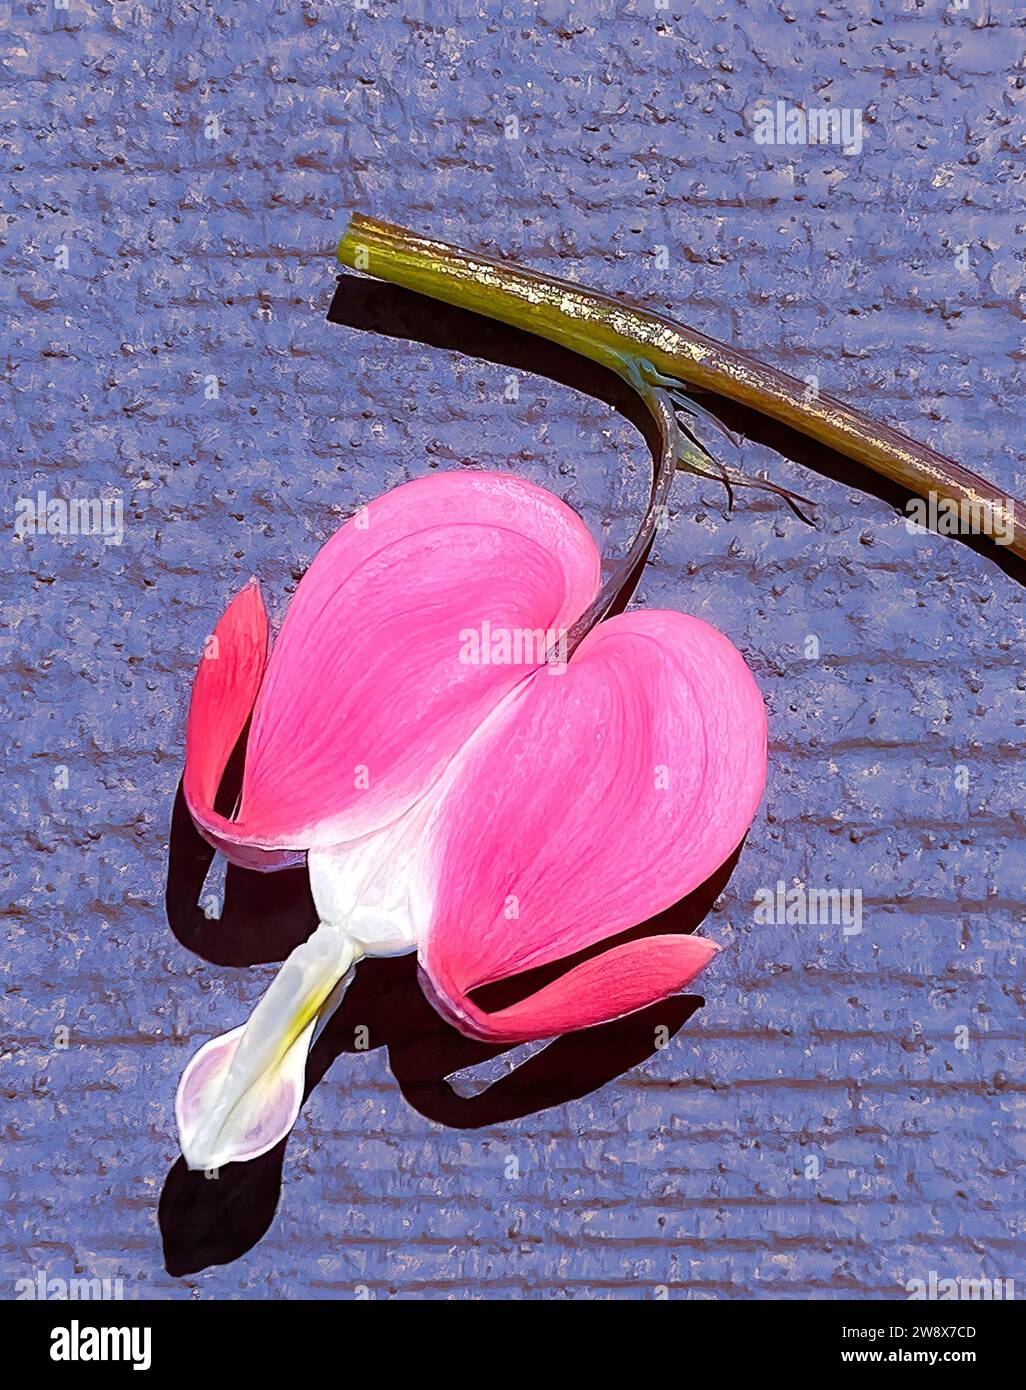 One pink Bleeding Heart flower (Lamprocapnos spectabilis) with stem attached, resting on purple painted background. Stock Photo